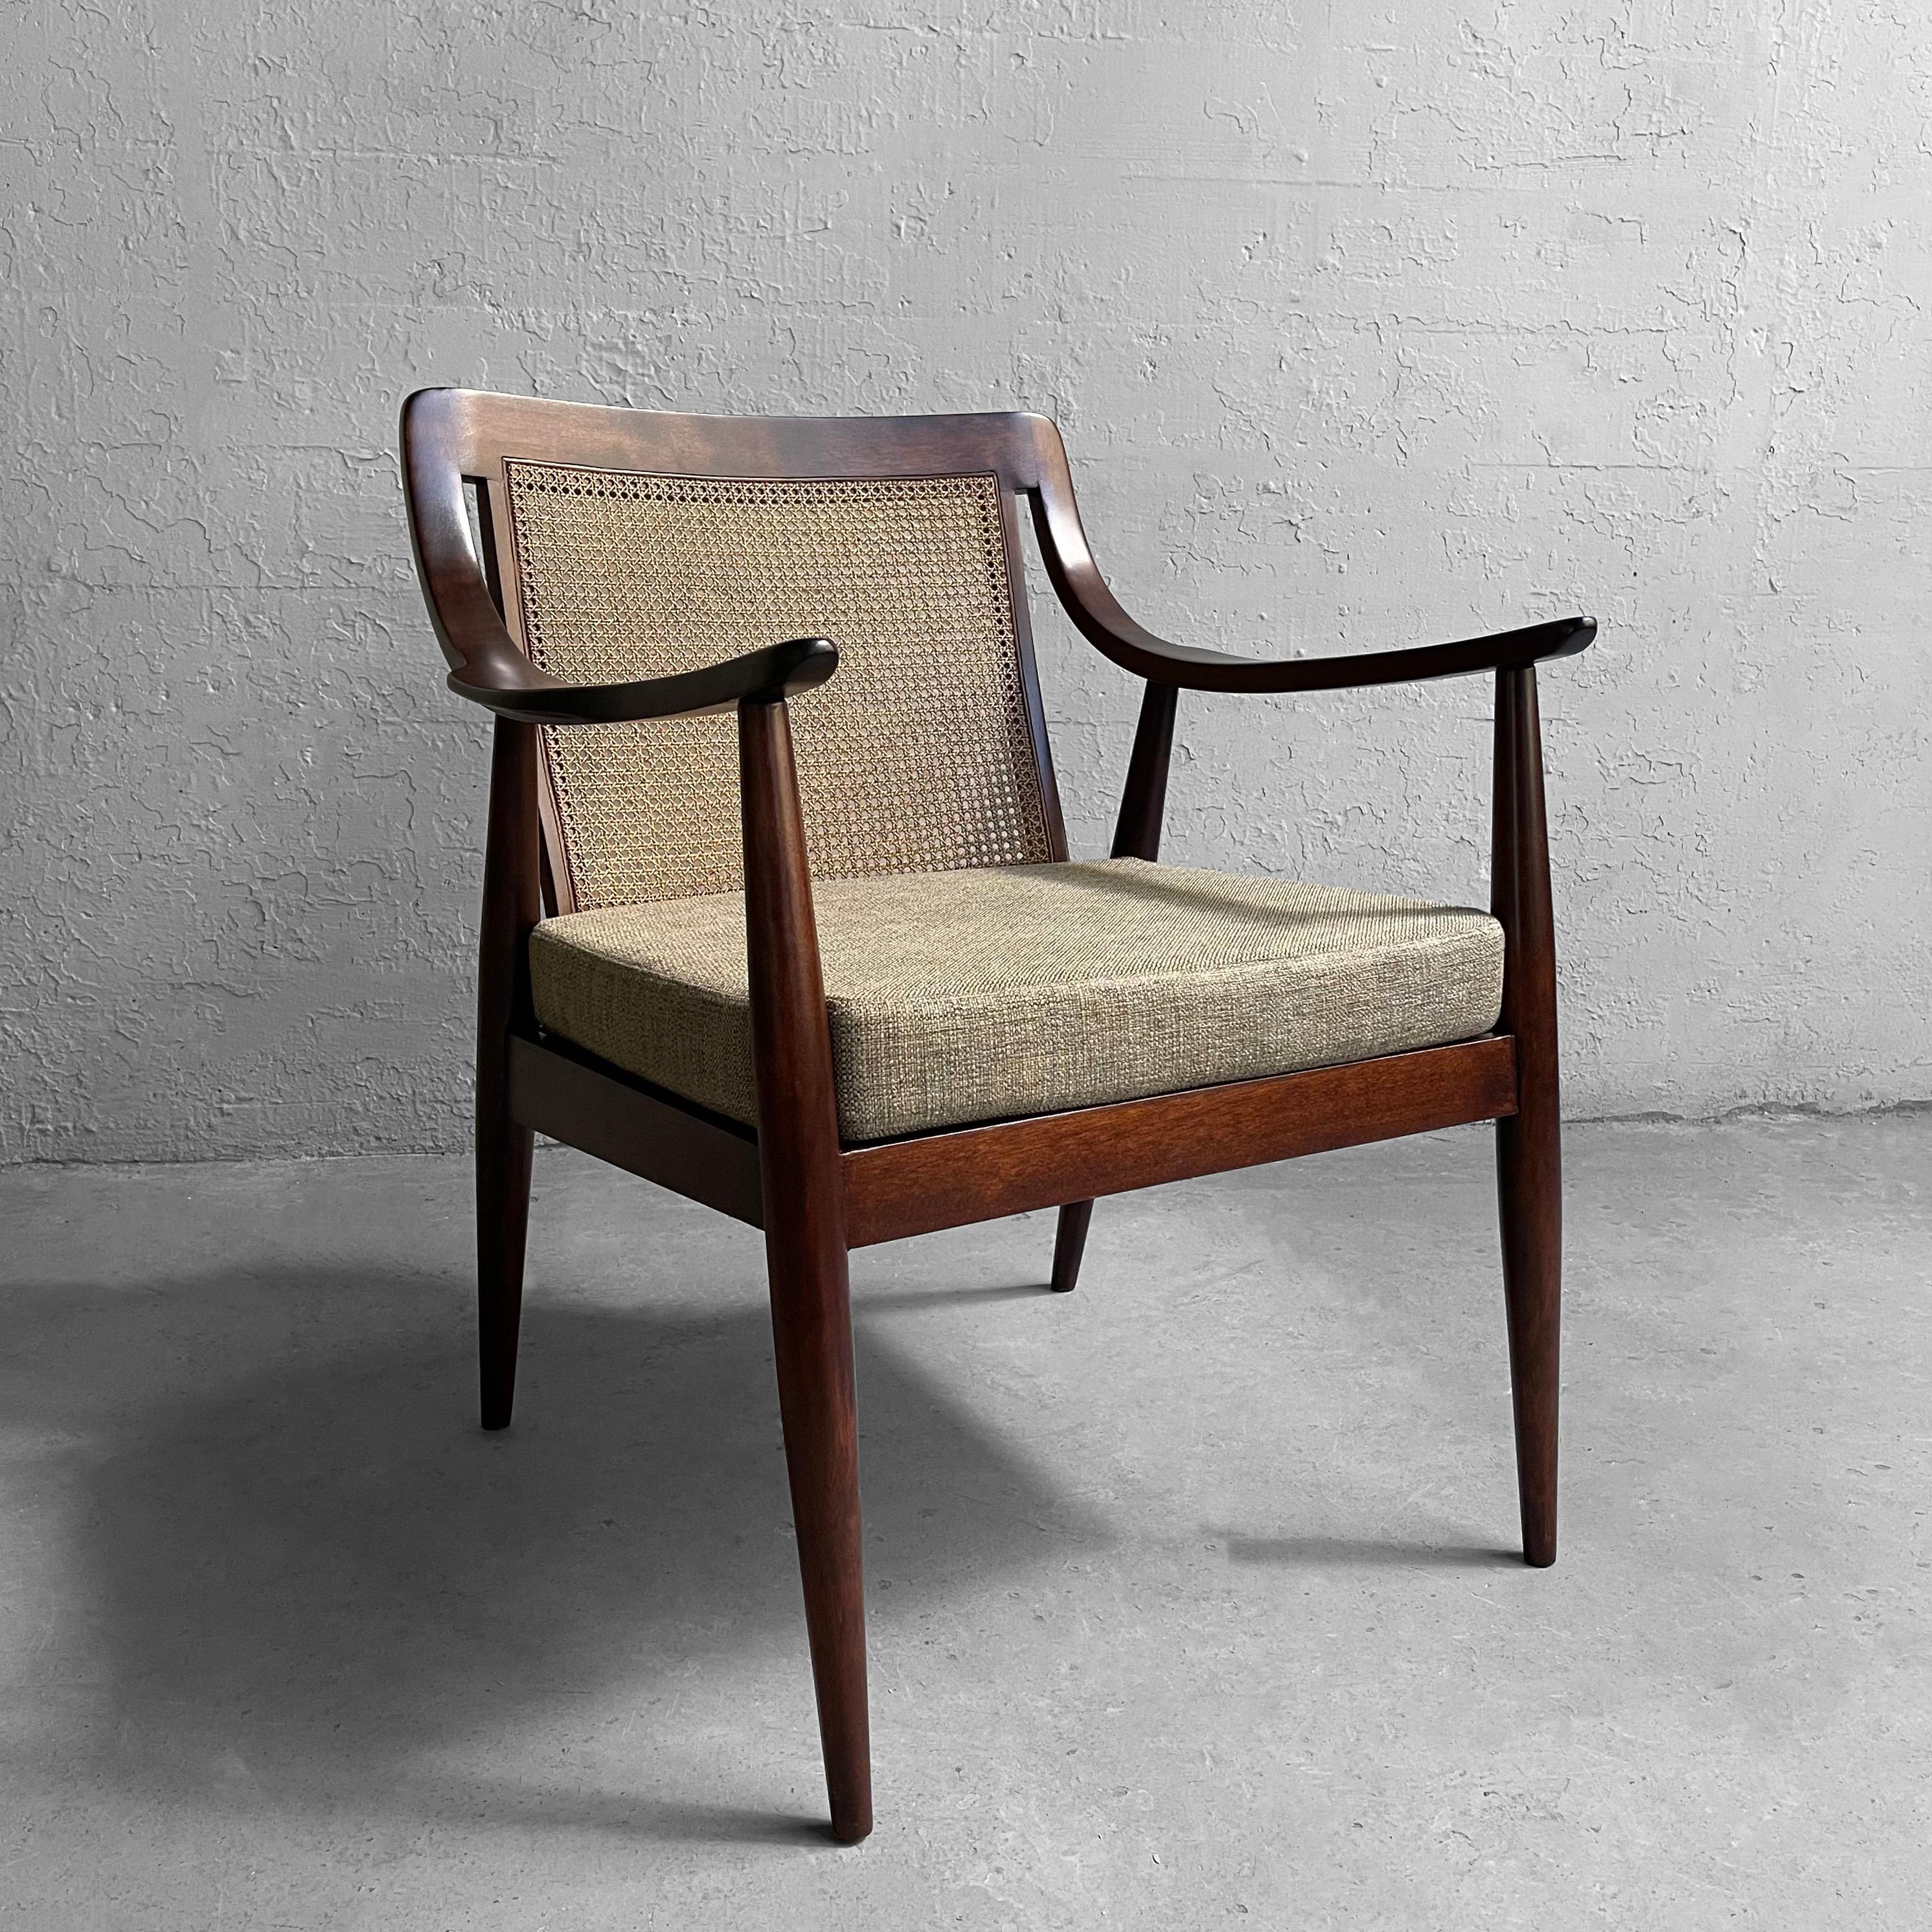 Danish modern armchair by Peter Hvdit & Orla Molgaard features a walnut frame with scoop arms, cane back and light green tweed upholstered seat.